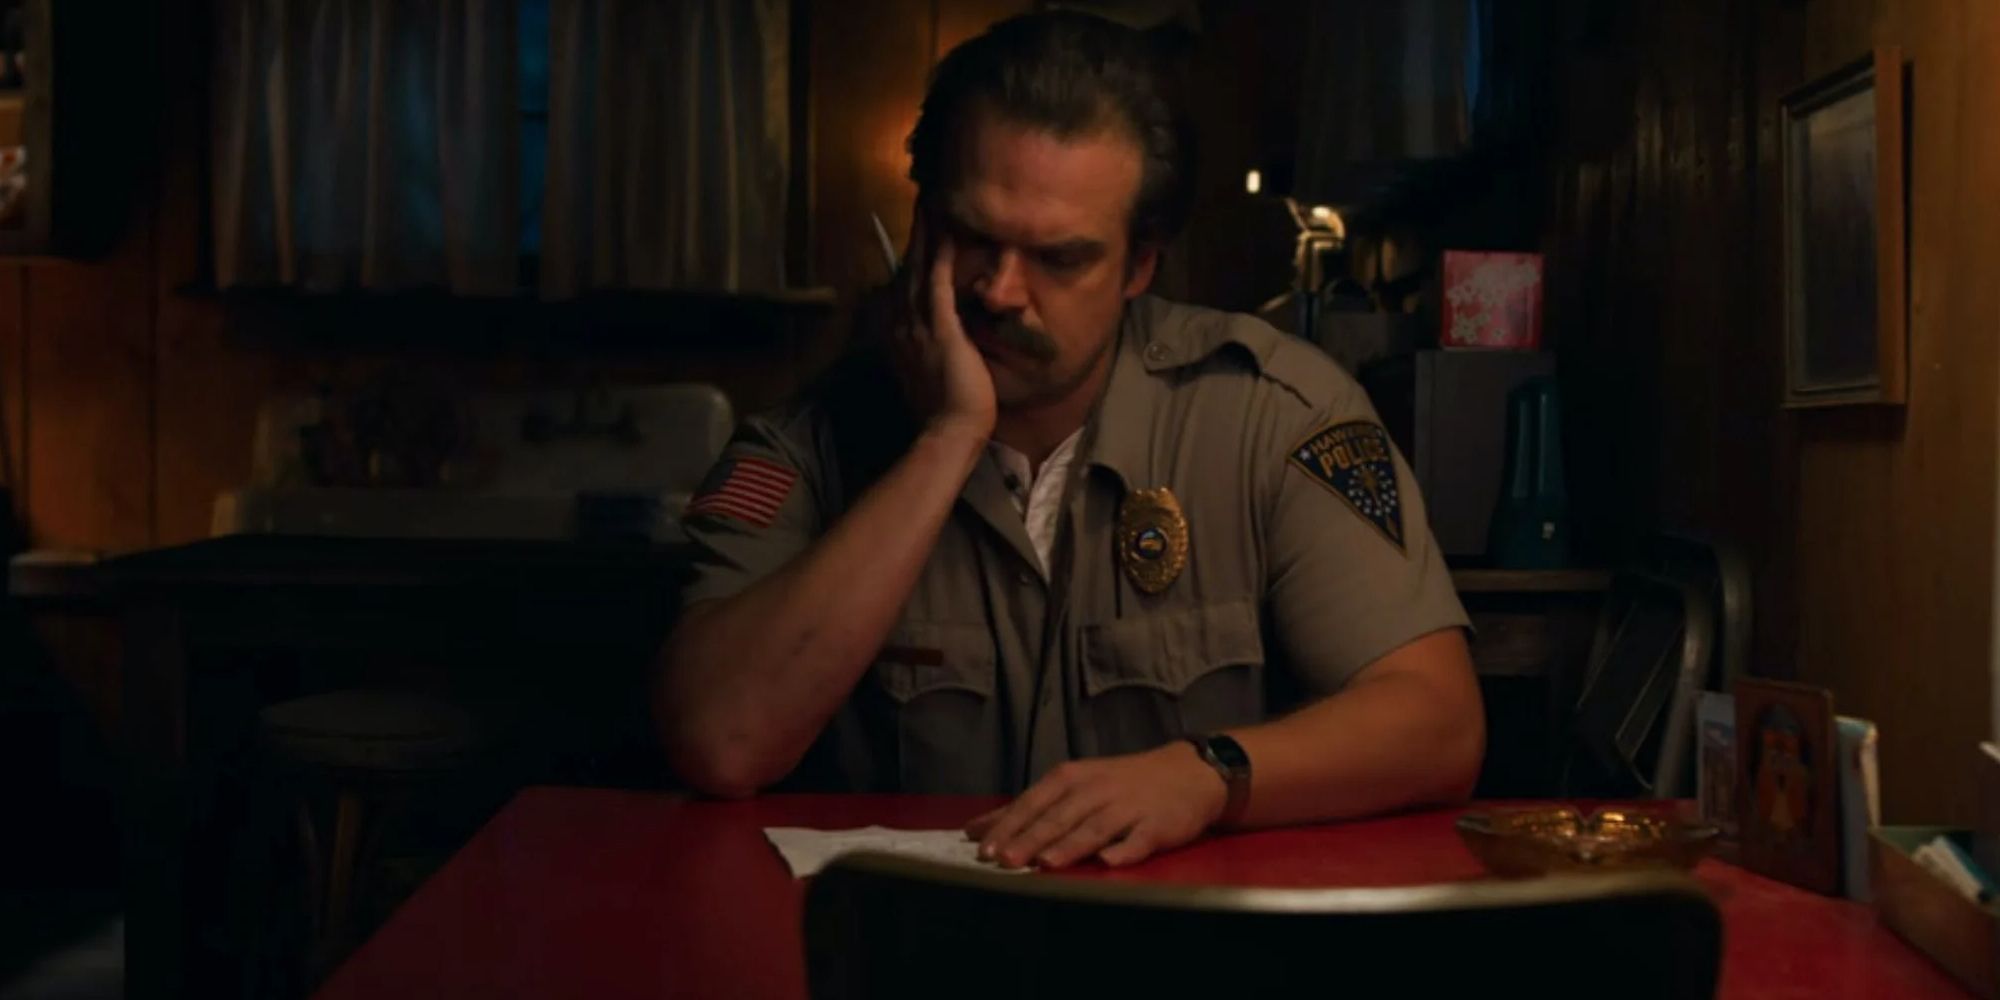 Hopper stares at the letter he's writing to Eleven and Mike